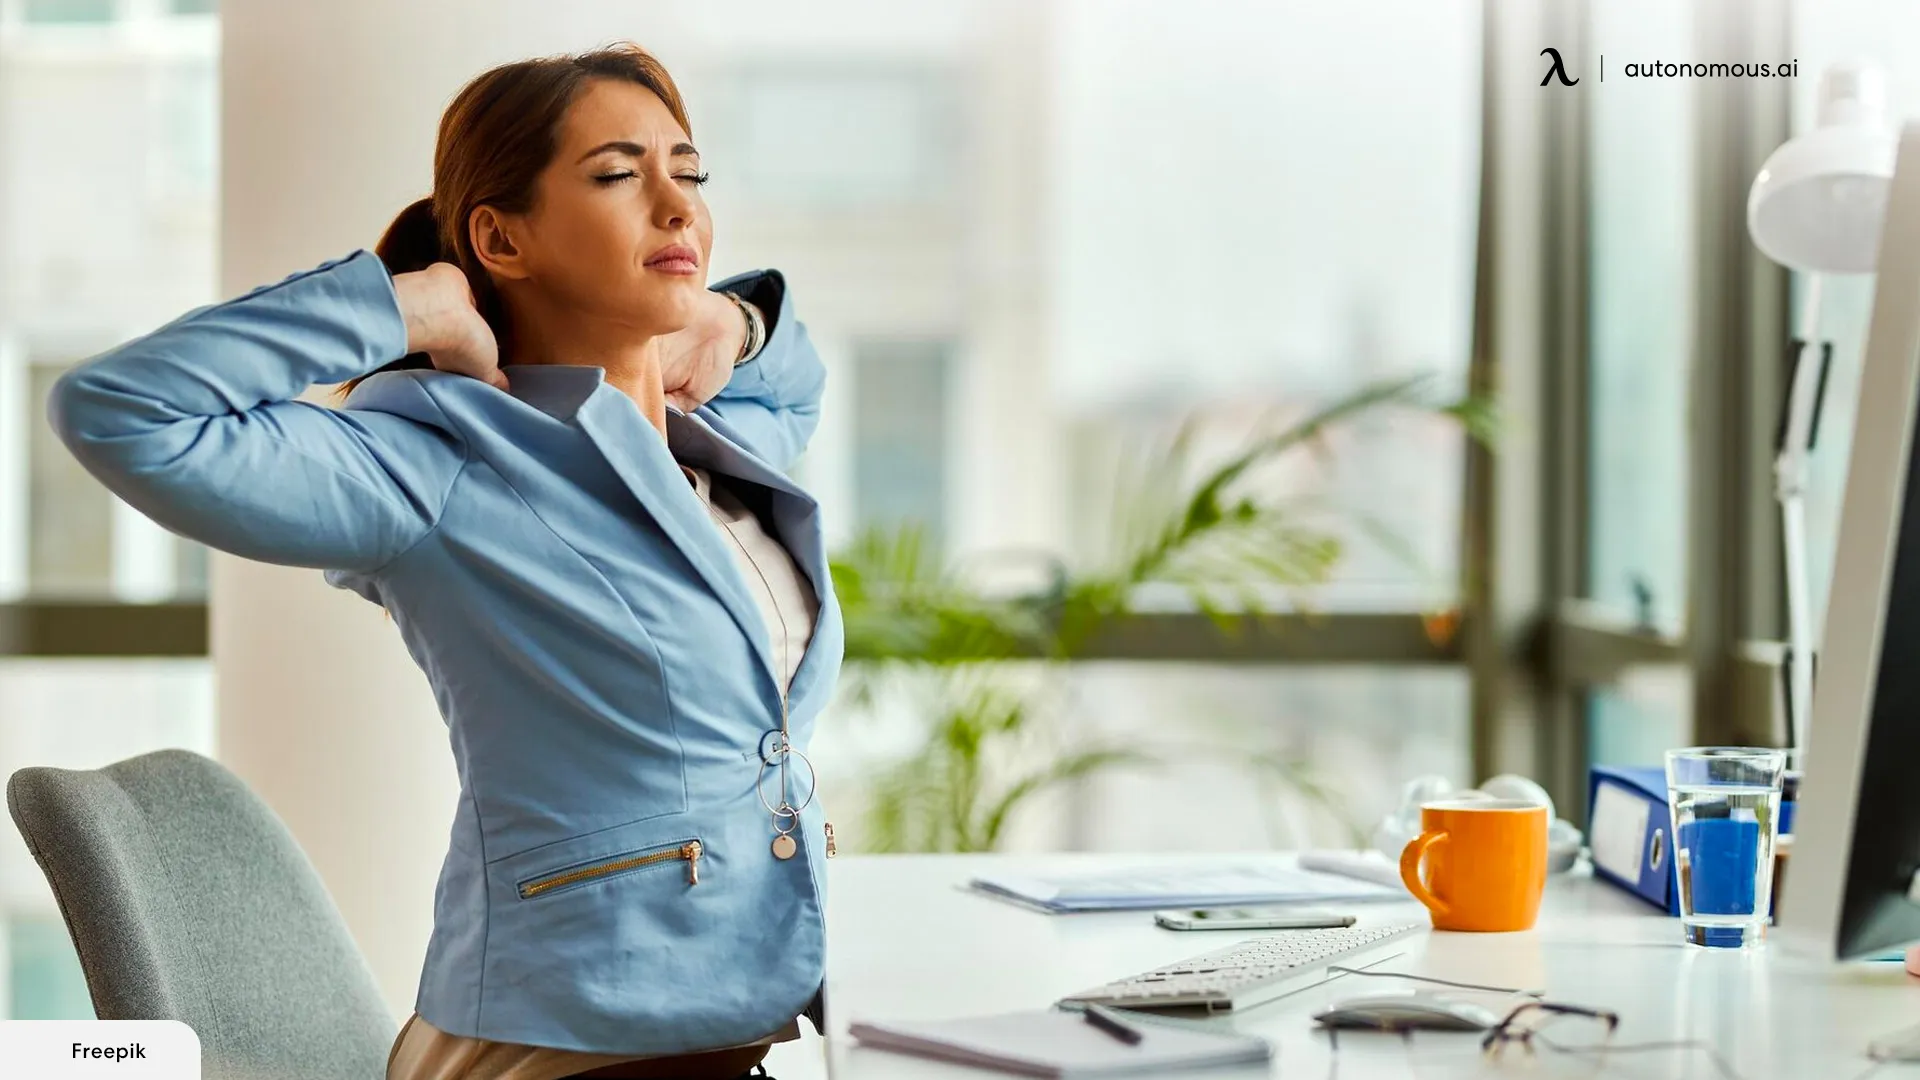 What Bad Office Habits Contribute to Upper Back and Neck Stiffness and Pain?